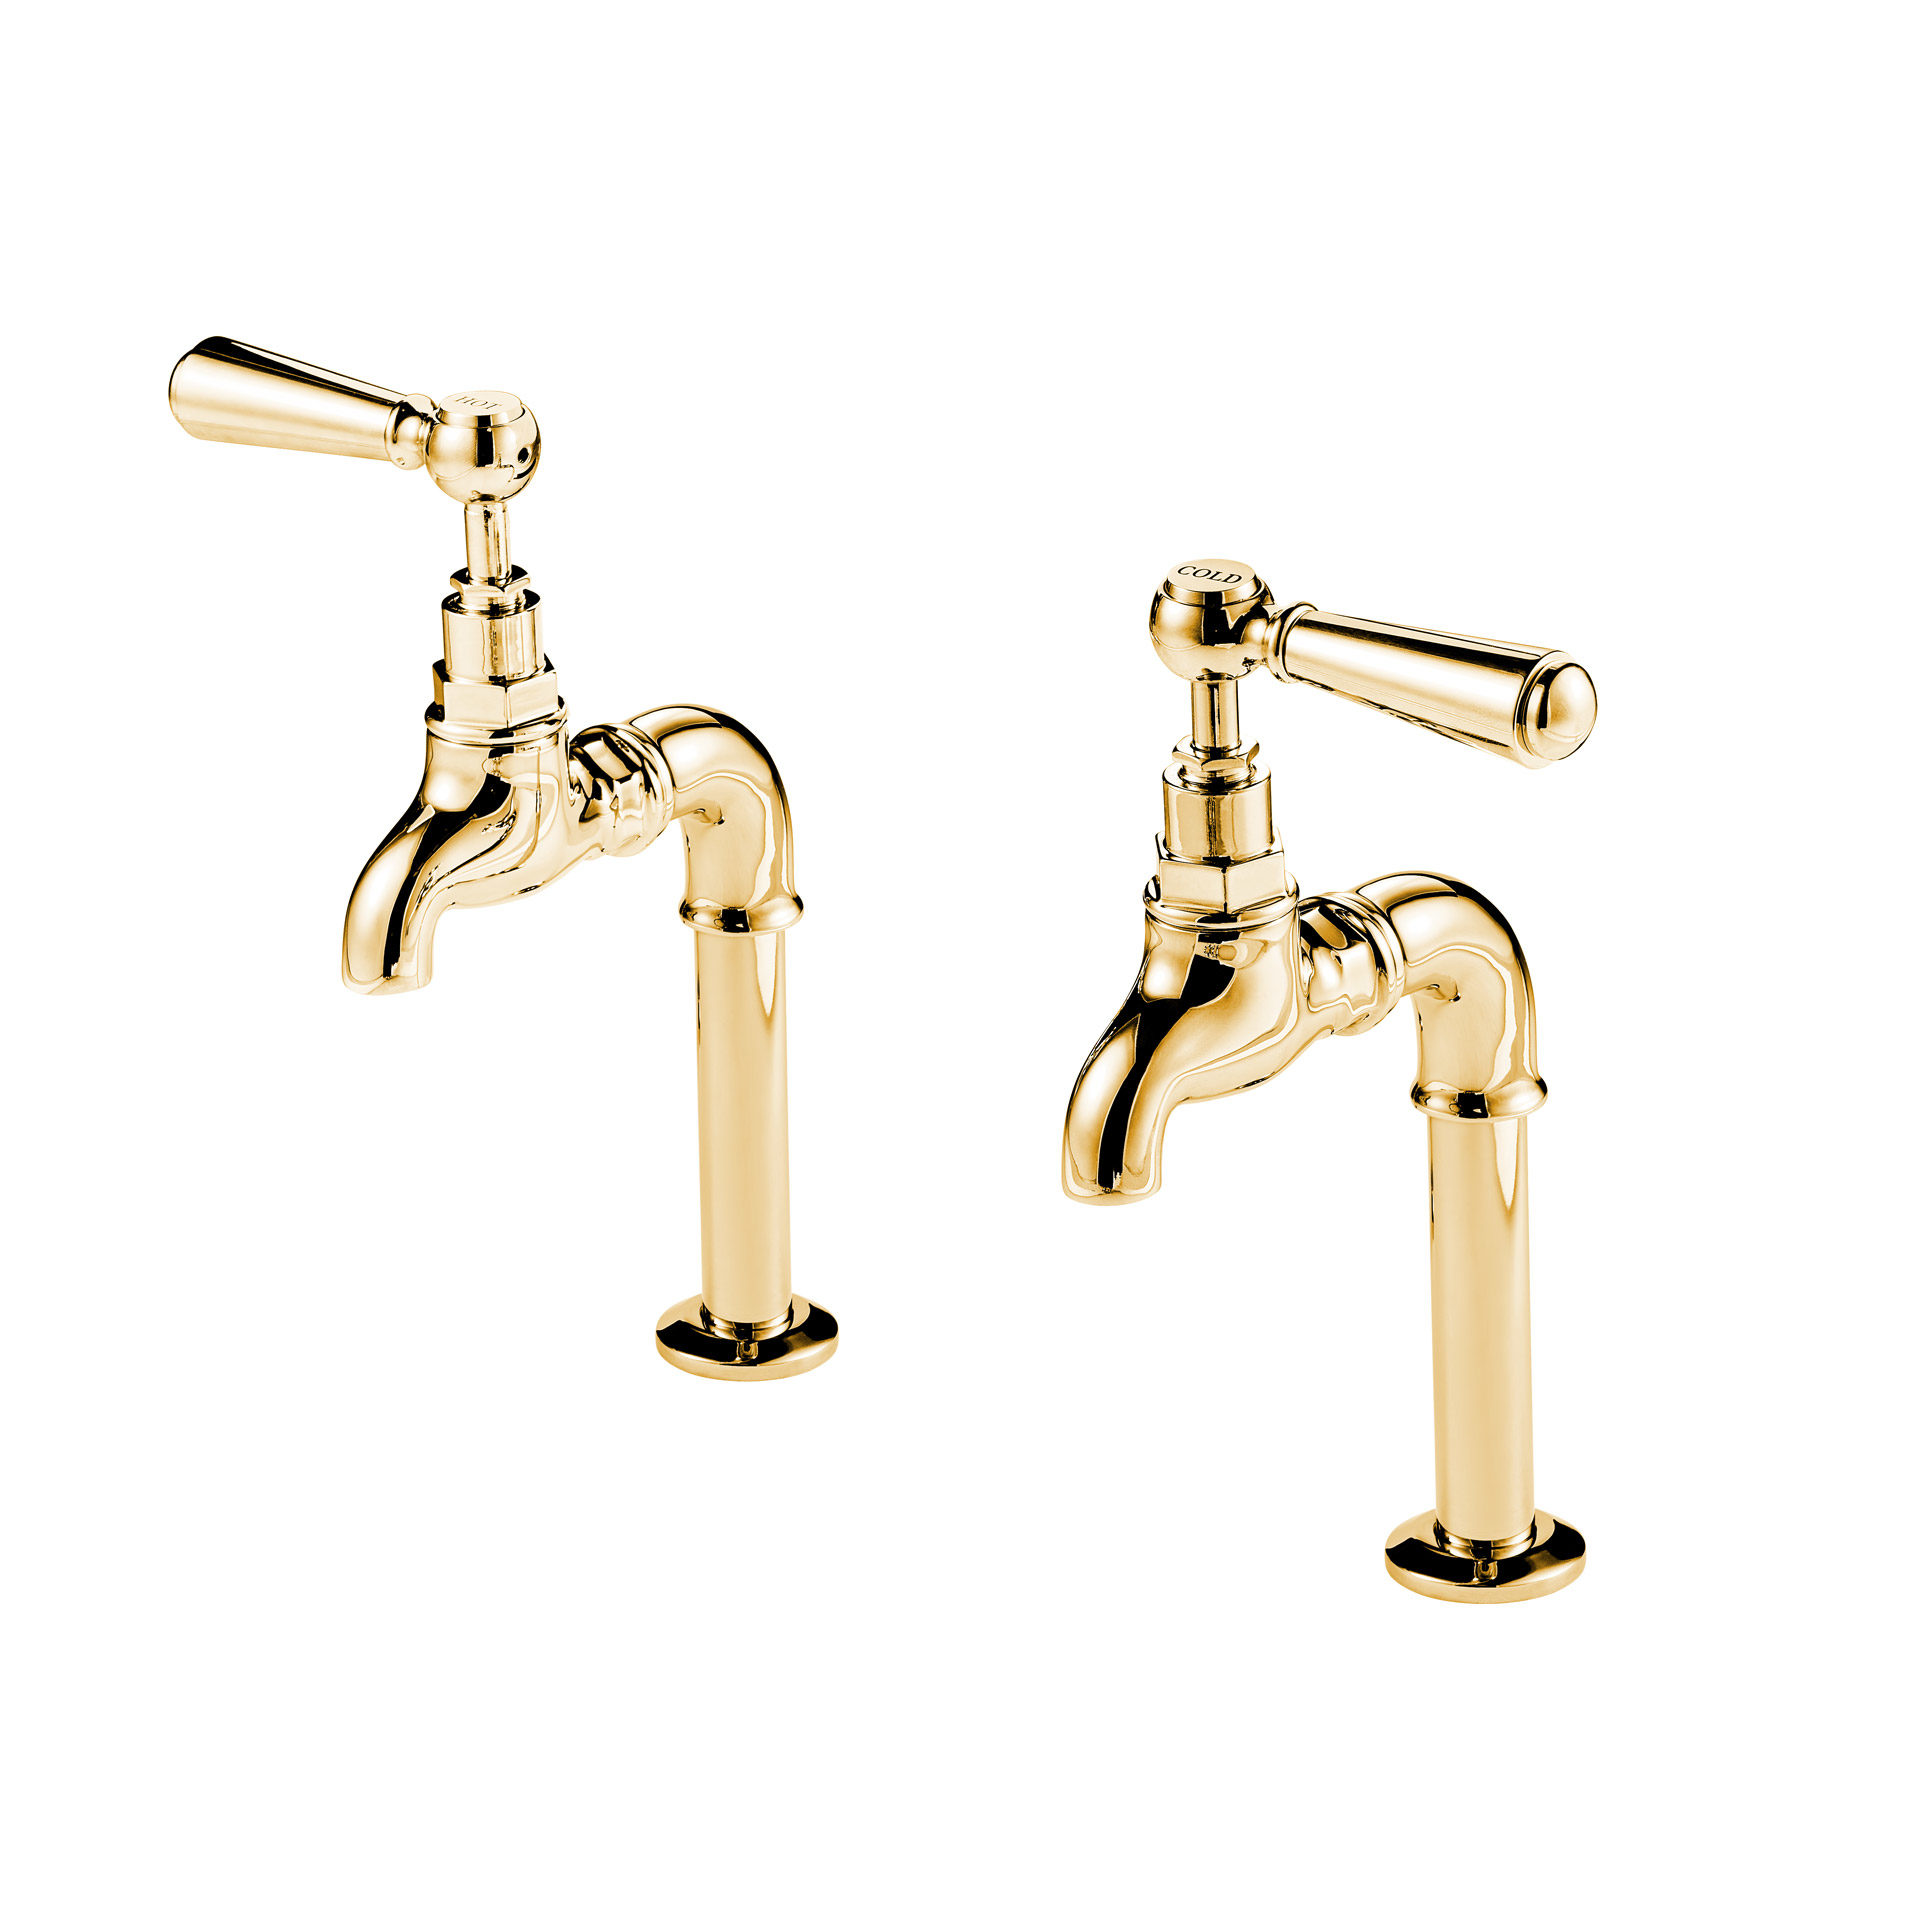 Barber Wilsons 6 Inch Deck Mounted Bib Taps in Polished Brass with Metal Lever - Regent 260, 1890's Style